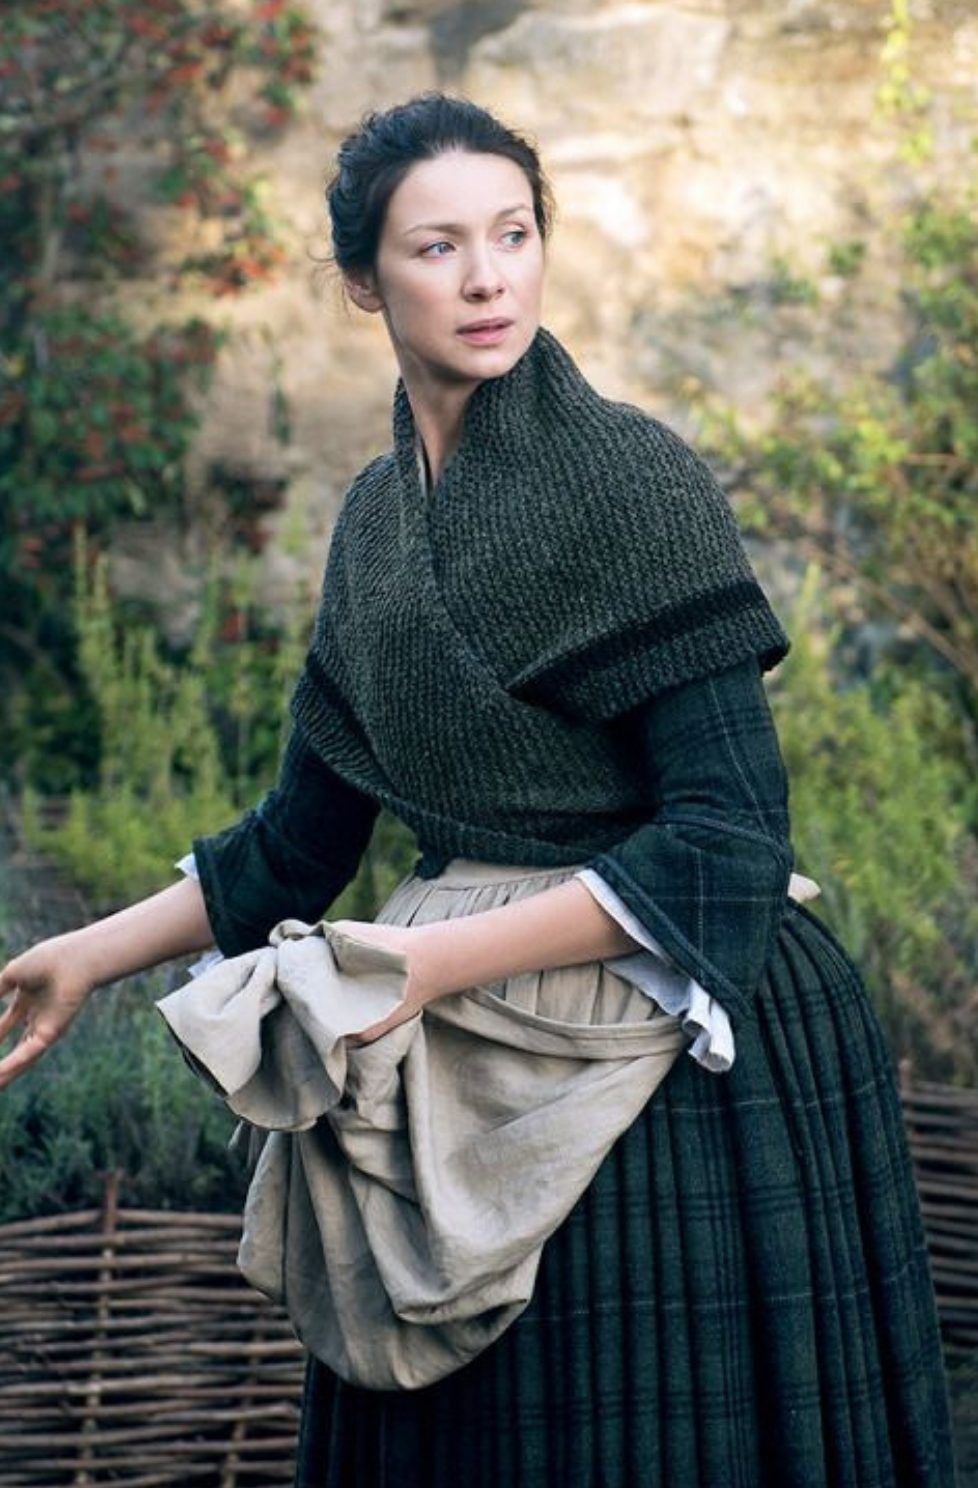 Free Knitting Patterns For Shrugs And Wraps Outlander Knitting Patterns Free Knitting Patterns Handy Little Me